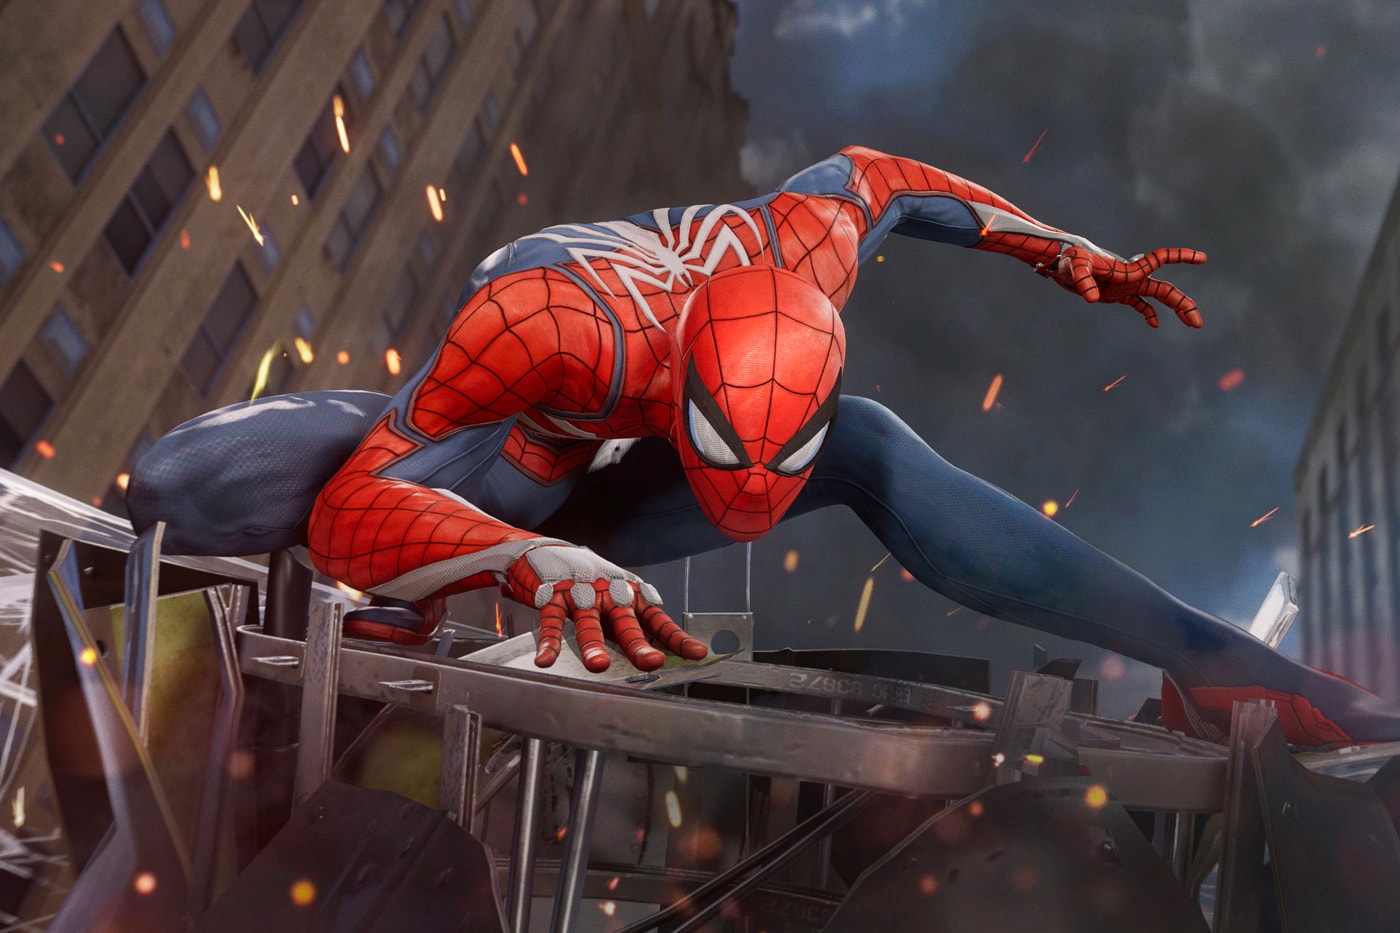 Sony Acquires Insomniac Games 229 Million USD games titles spiderman marvel ratchet and clank spyro ted price 1994 xtreme software sunset overdrive IP worldwide studios developers